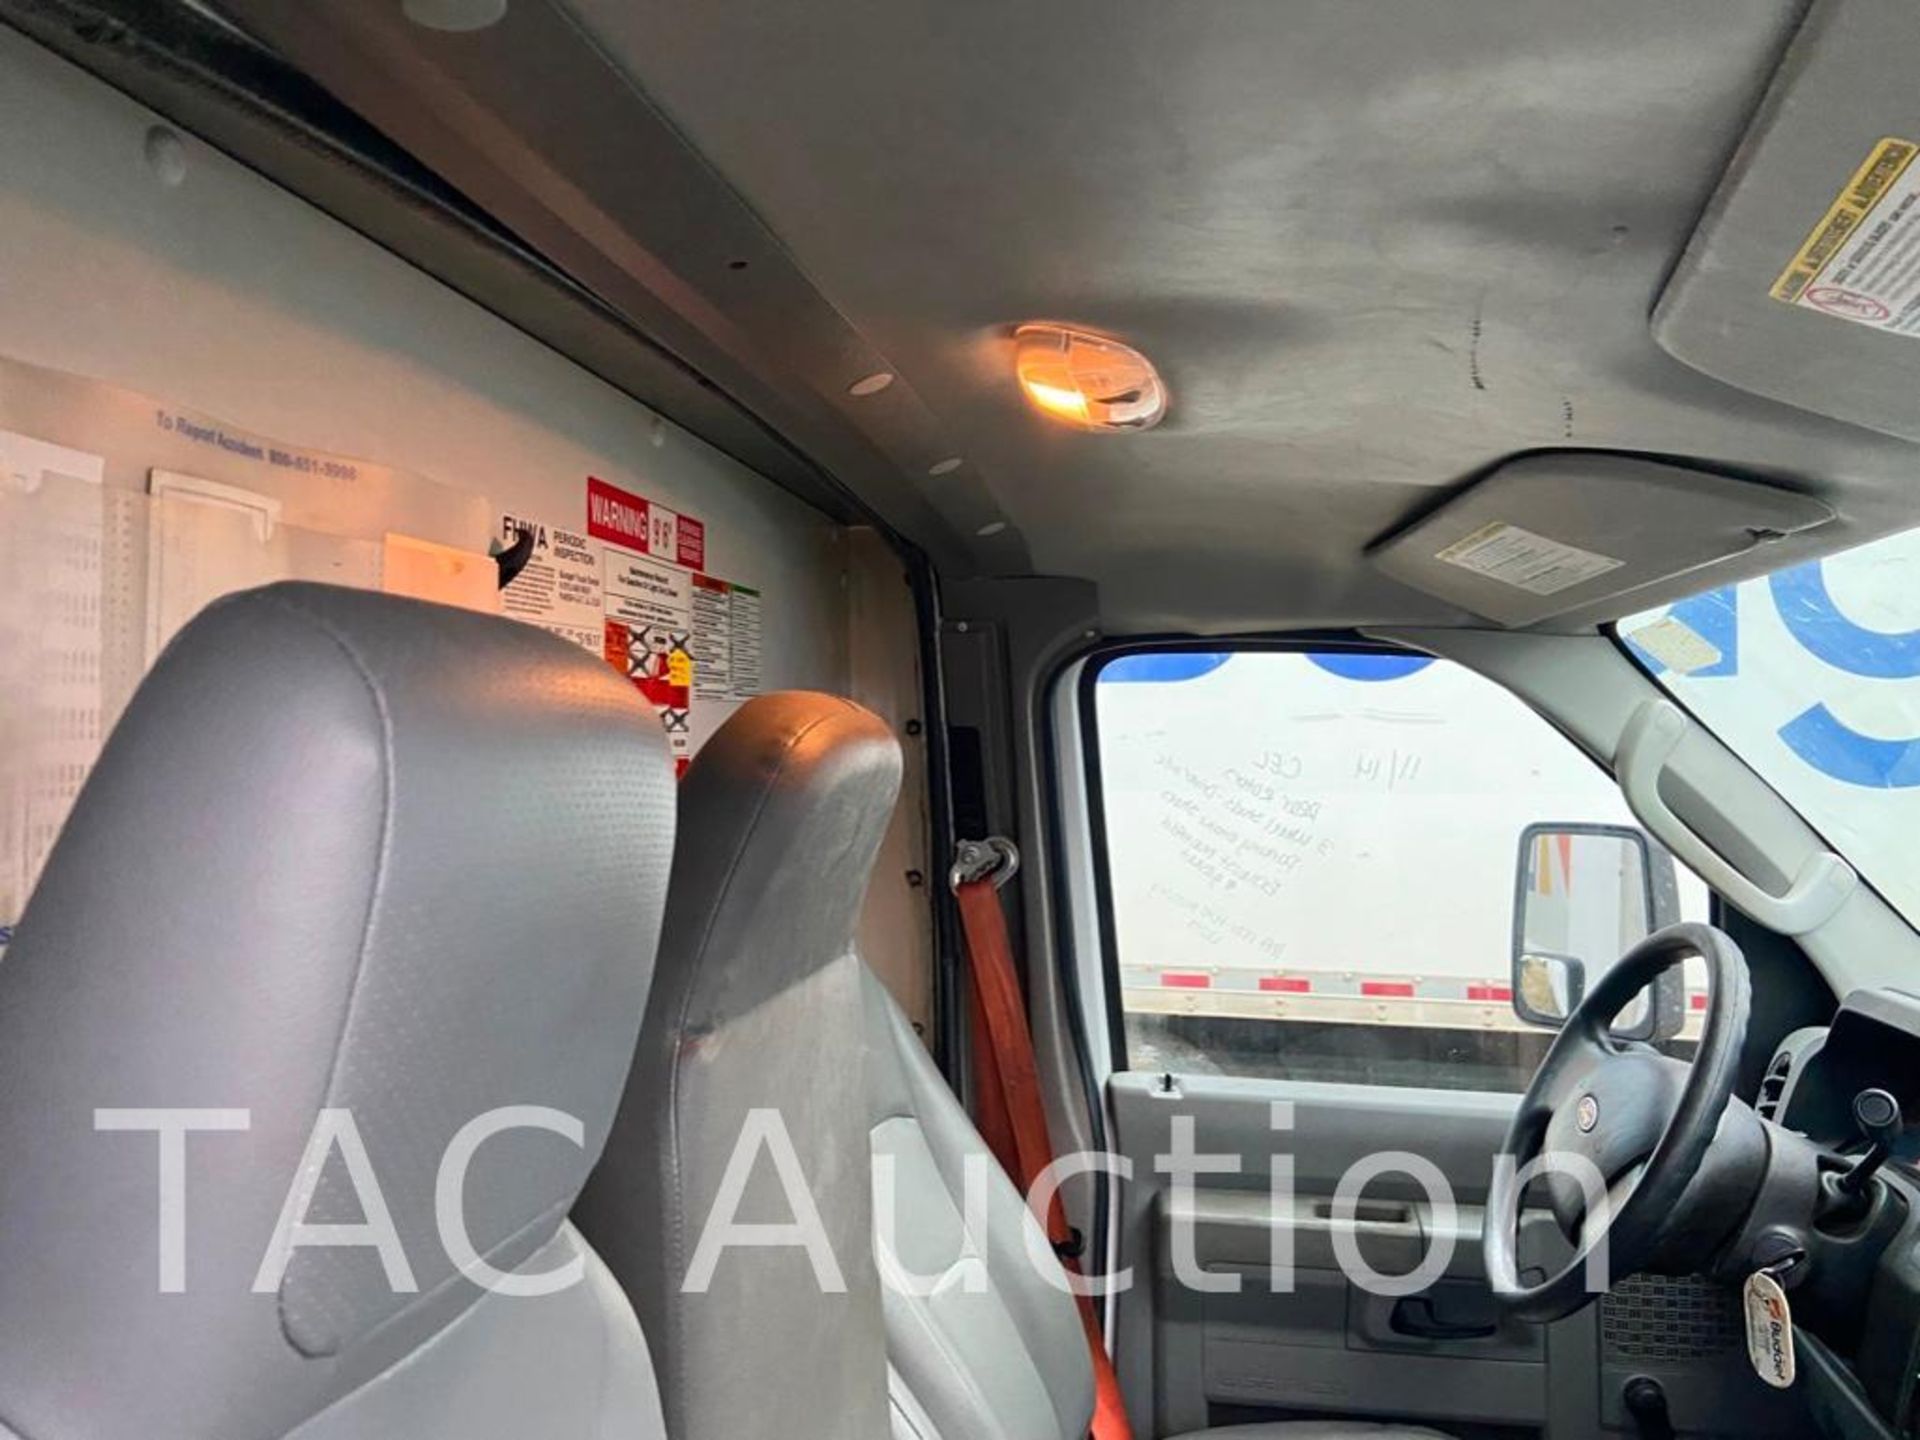 2015 Ford E-350 12ft Box Truck - Image 27 of 73